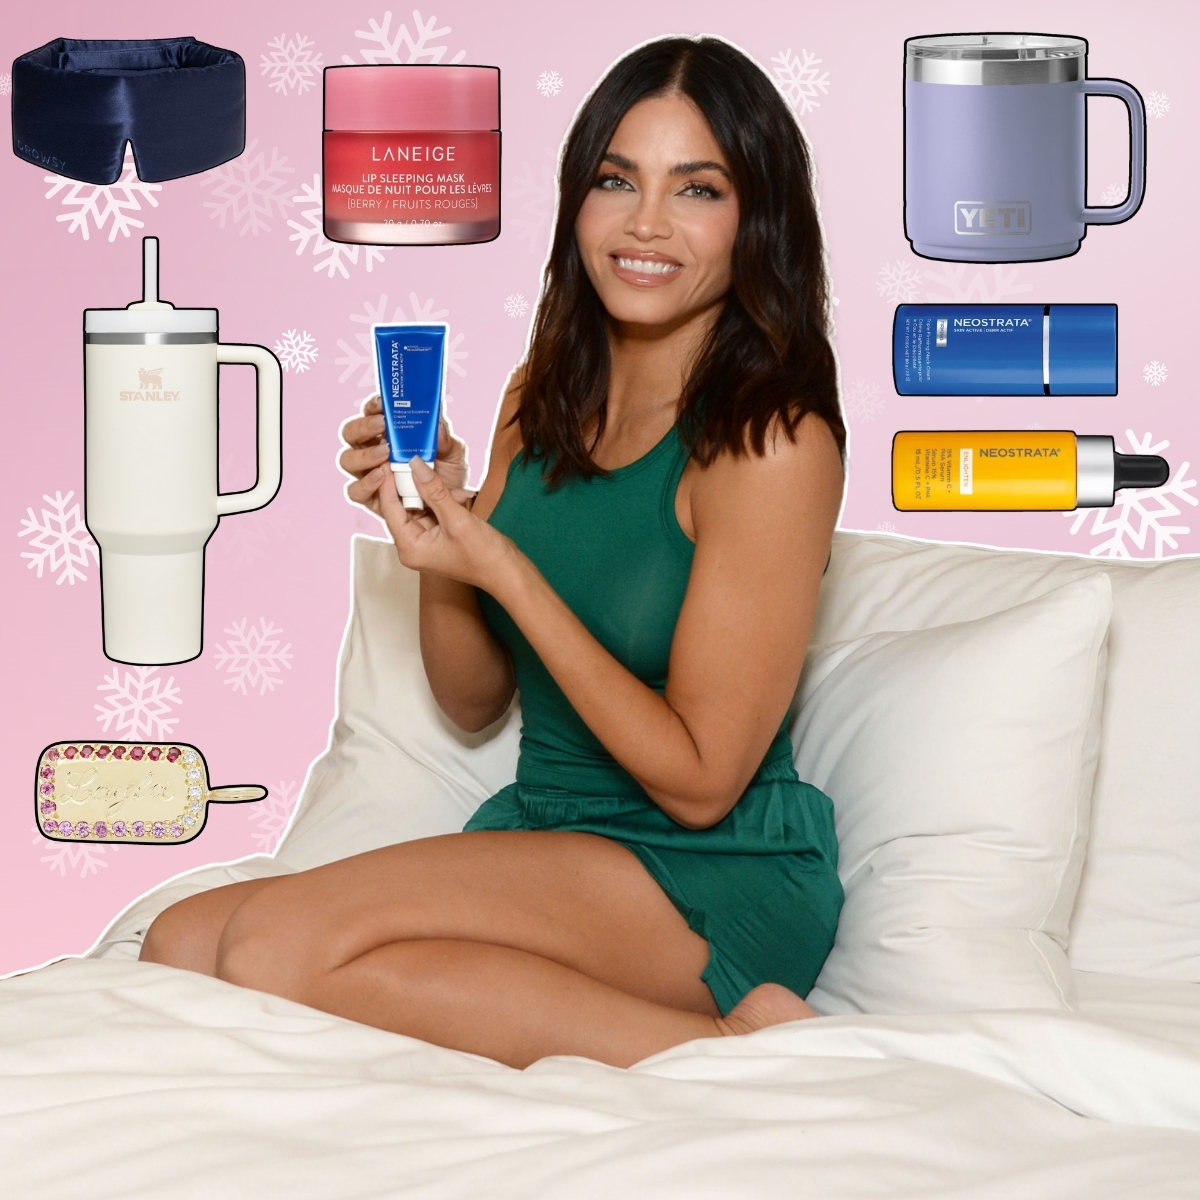 Take the Lead this Holiday Season with Jenna Dewan’s Super Gift Picks